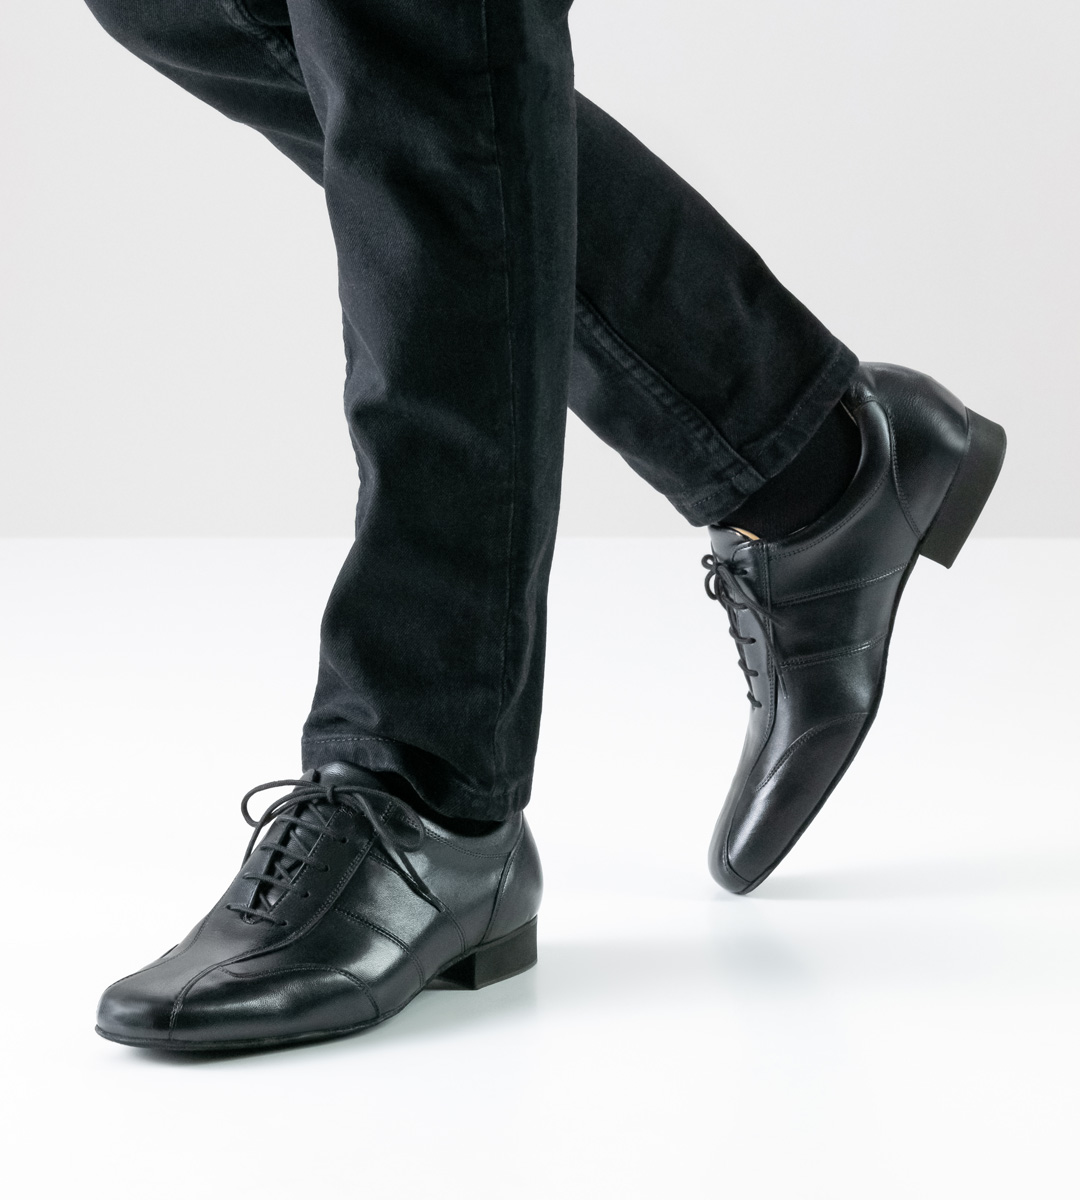 black men's dance shoe by Werner Kern in combination with black trousers